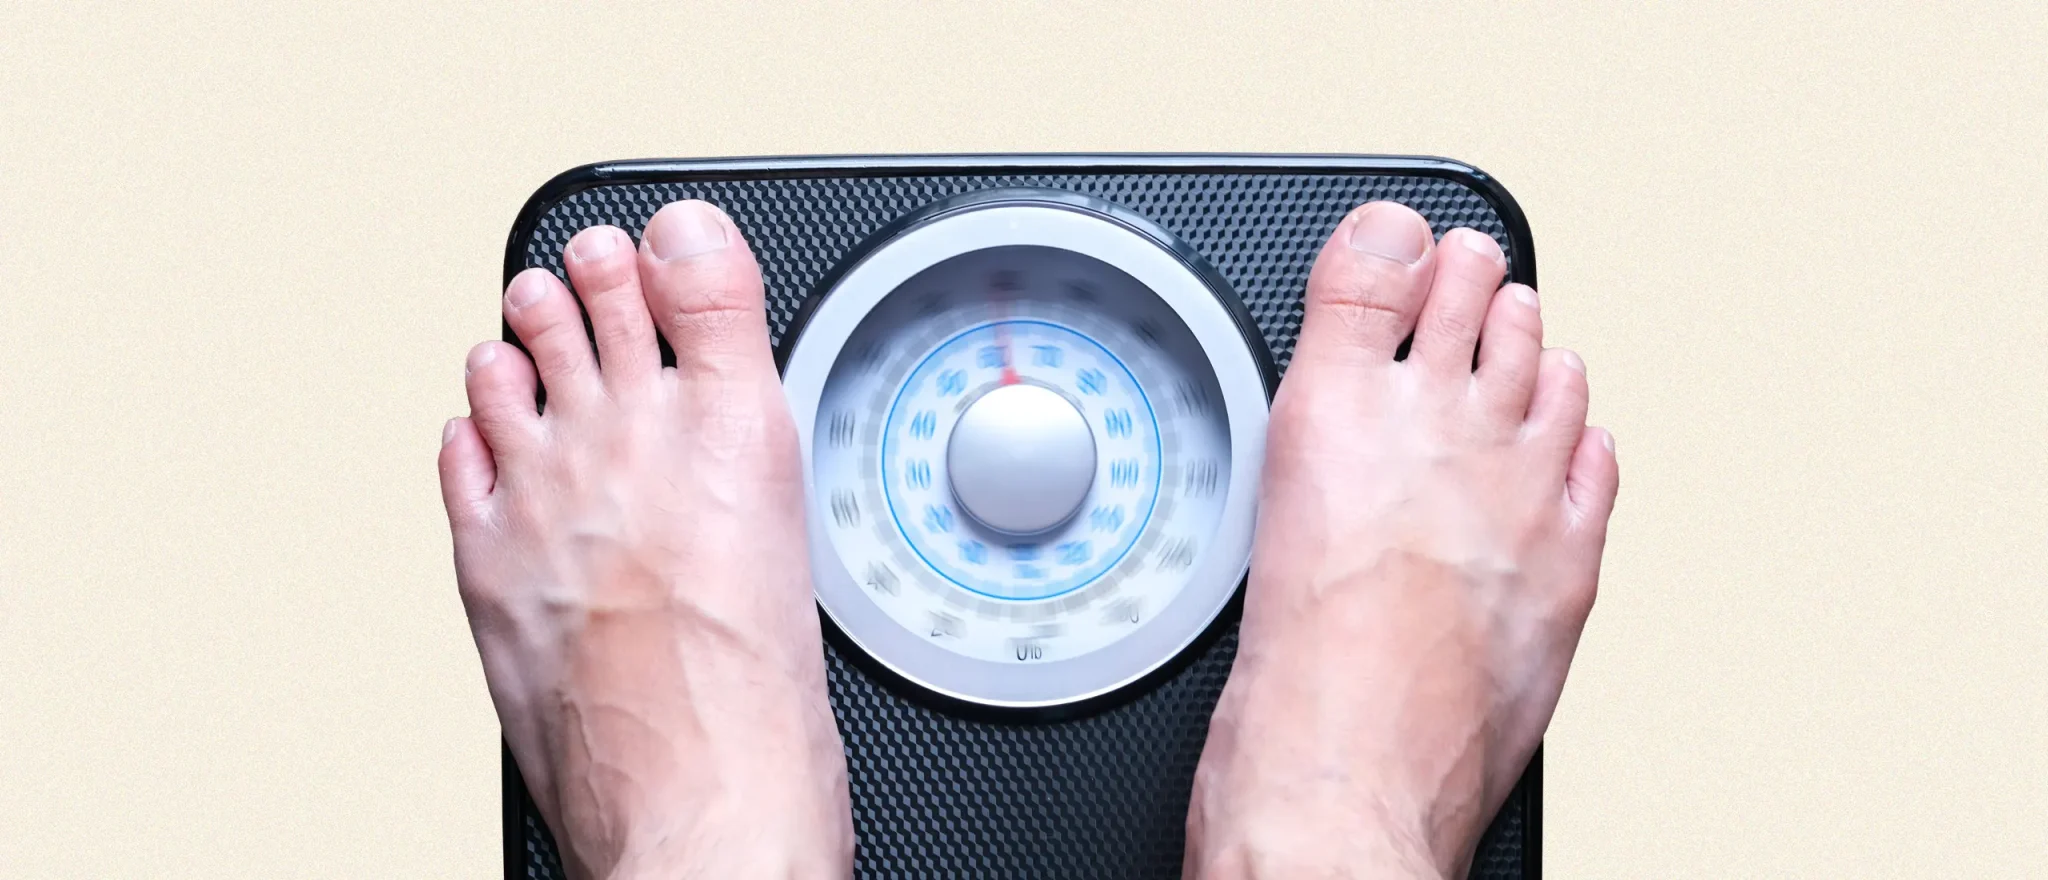 Does Testosterone Make You Gain Weight?